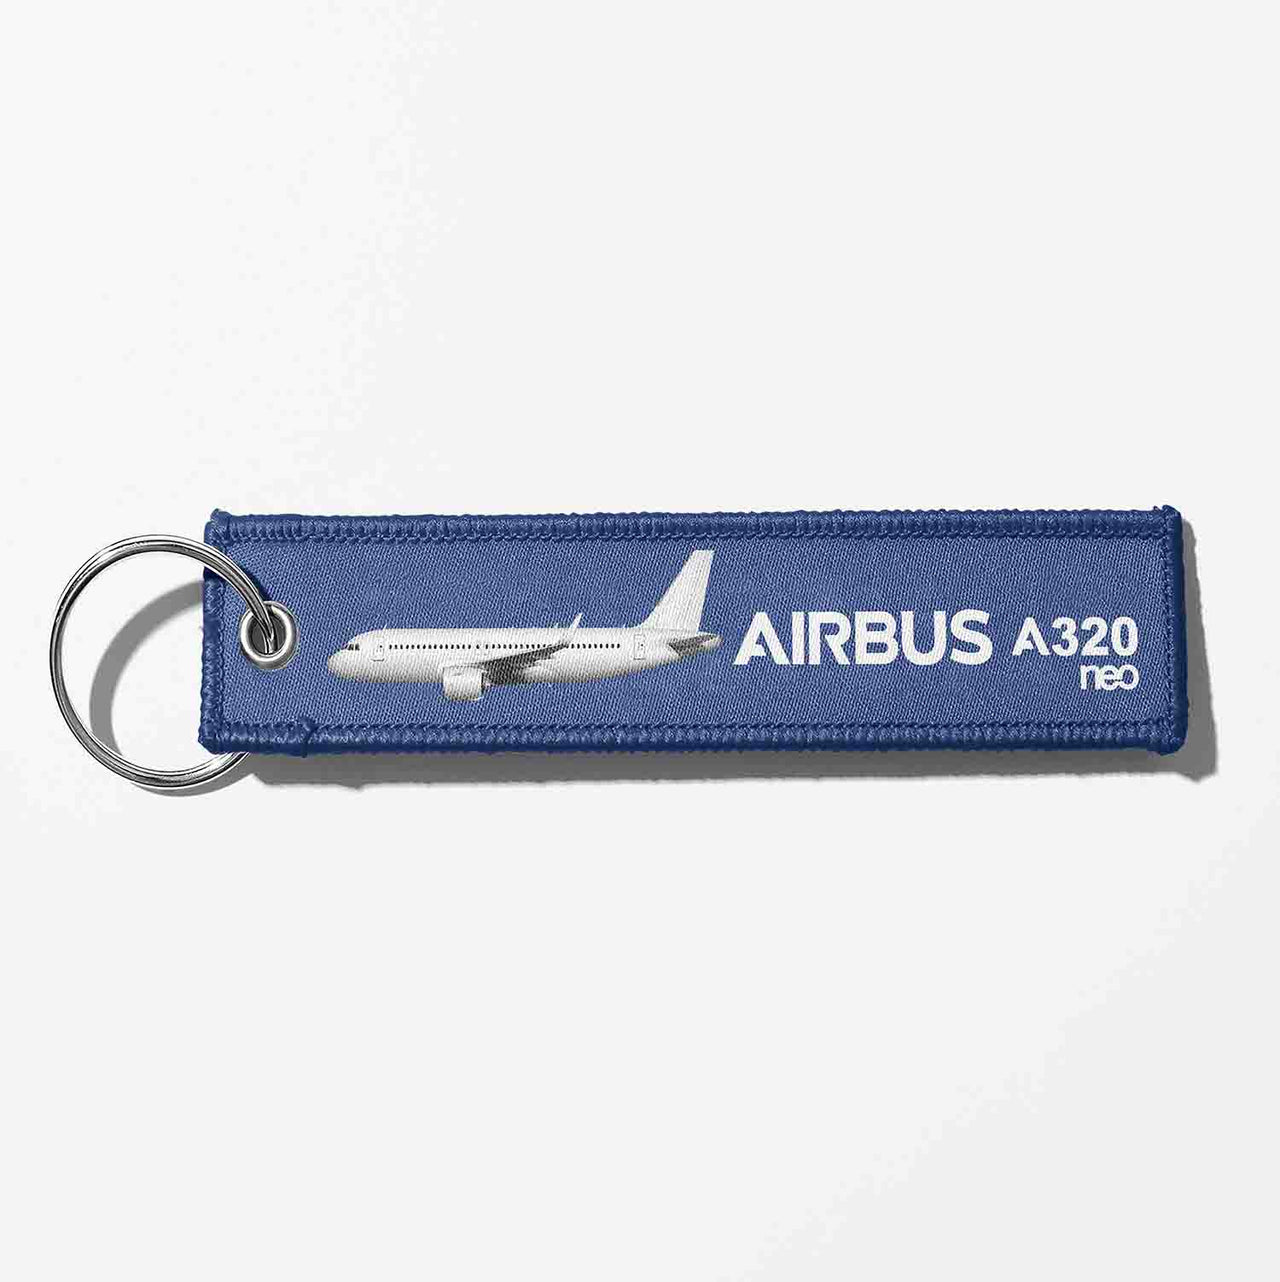 The Airbus A320neo Designed Key Chains